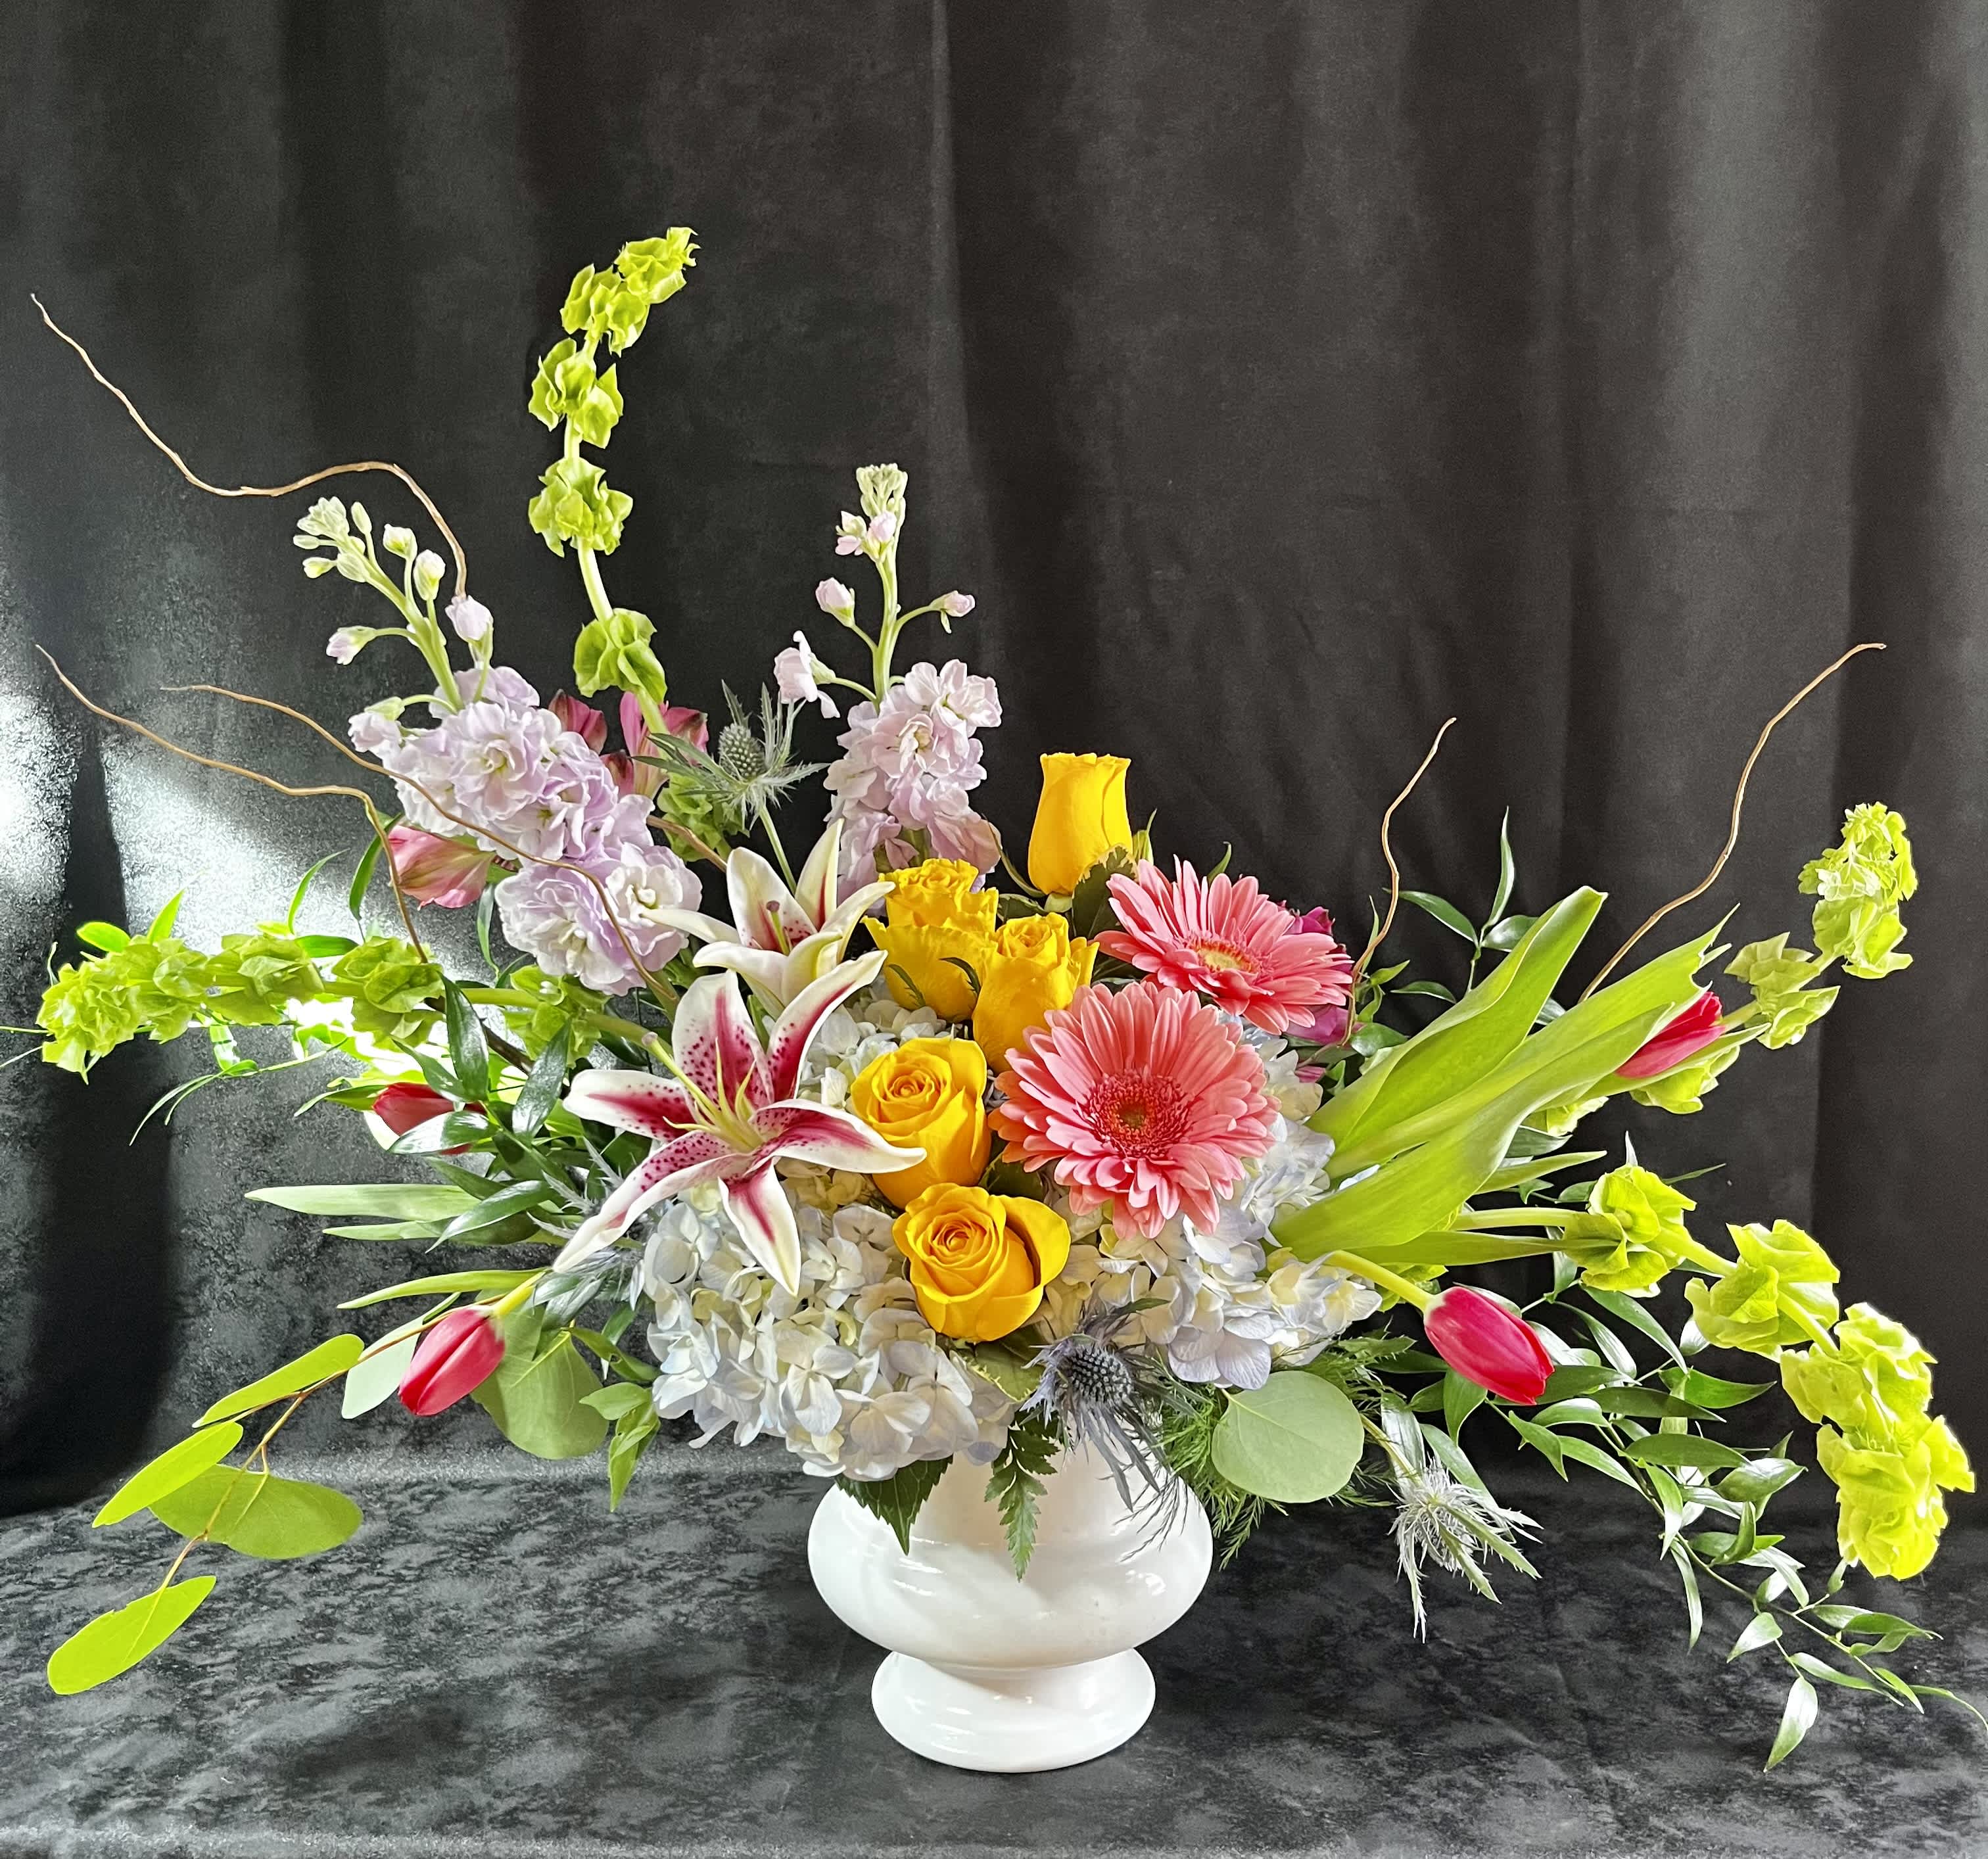 Colorful Tribute - Mixed colors and flowers with lilies, tulips, roses and more.